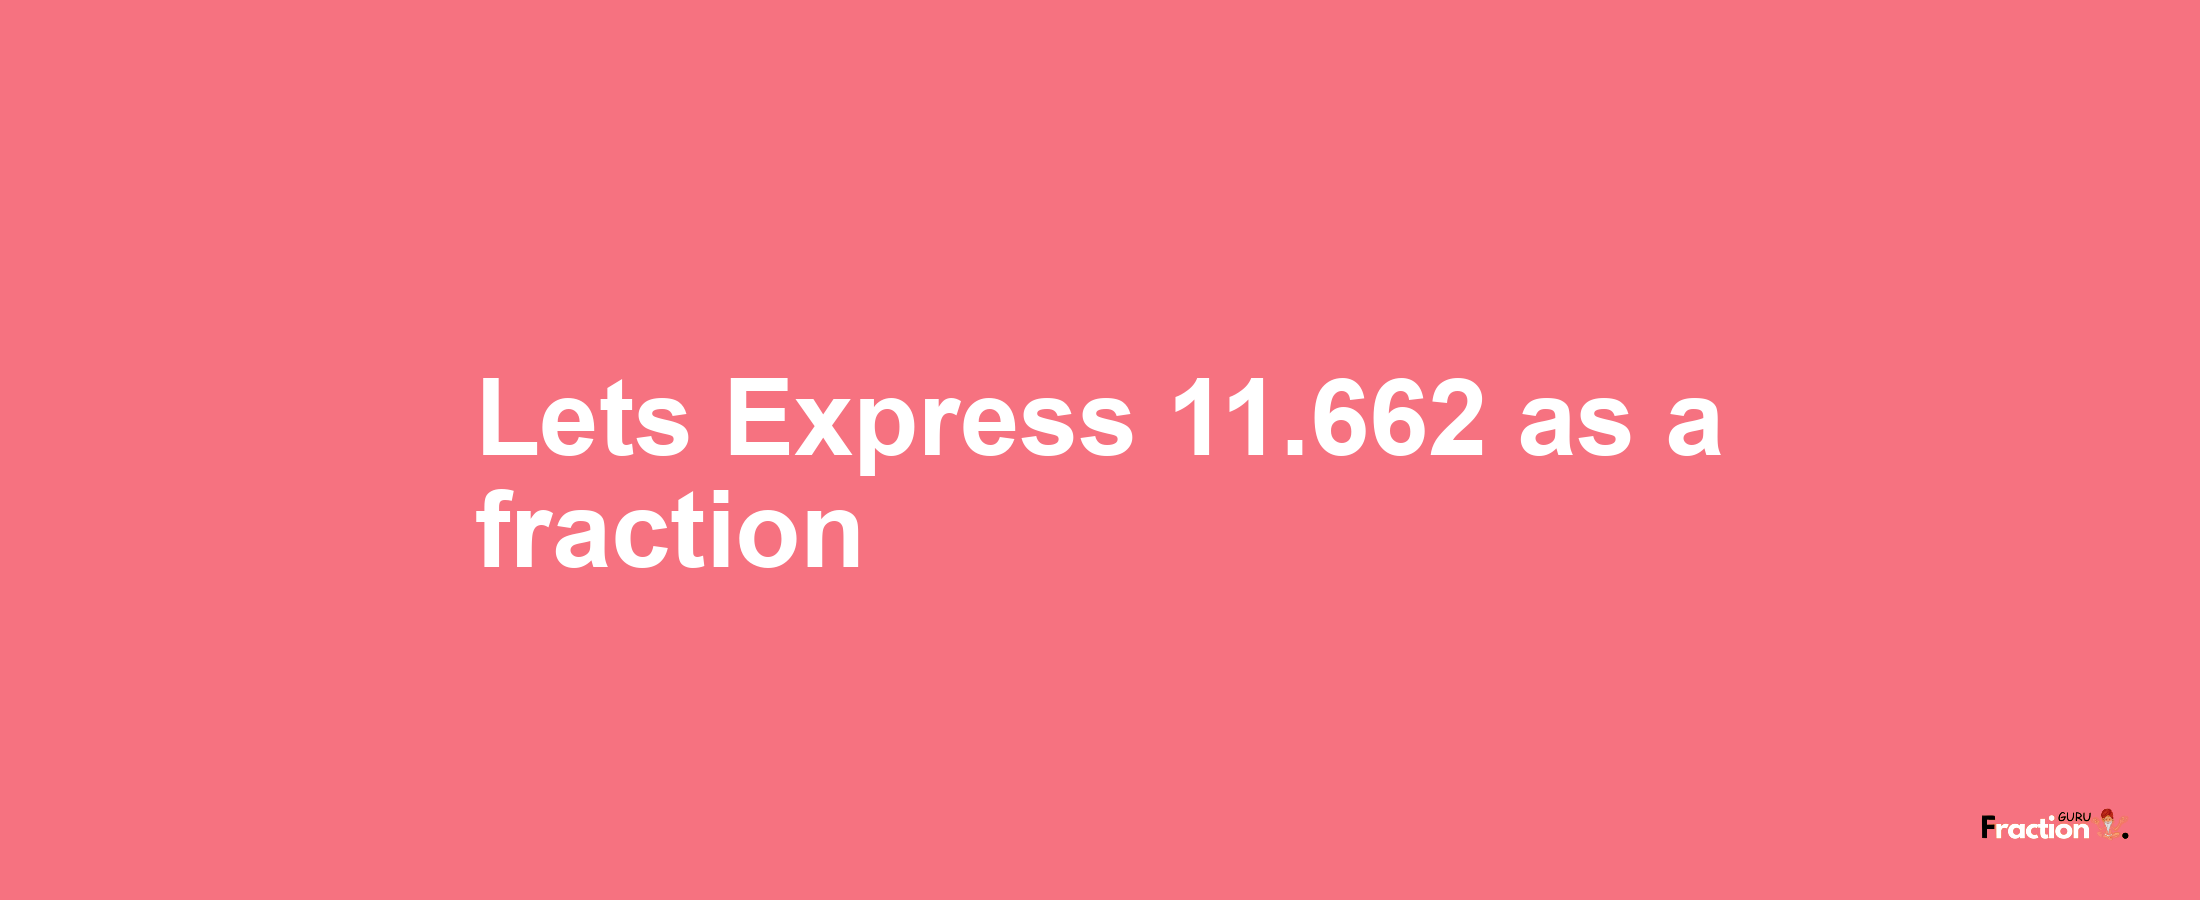 Lets Express 11.662 as afraction